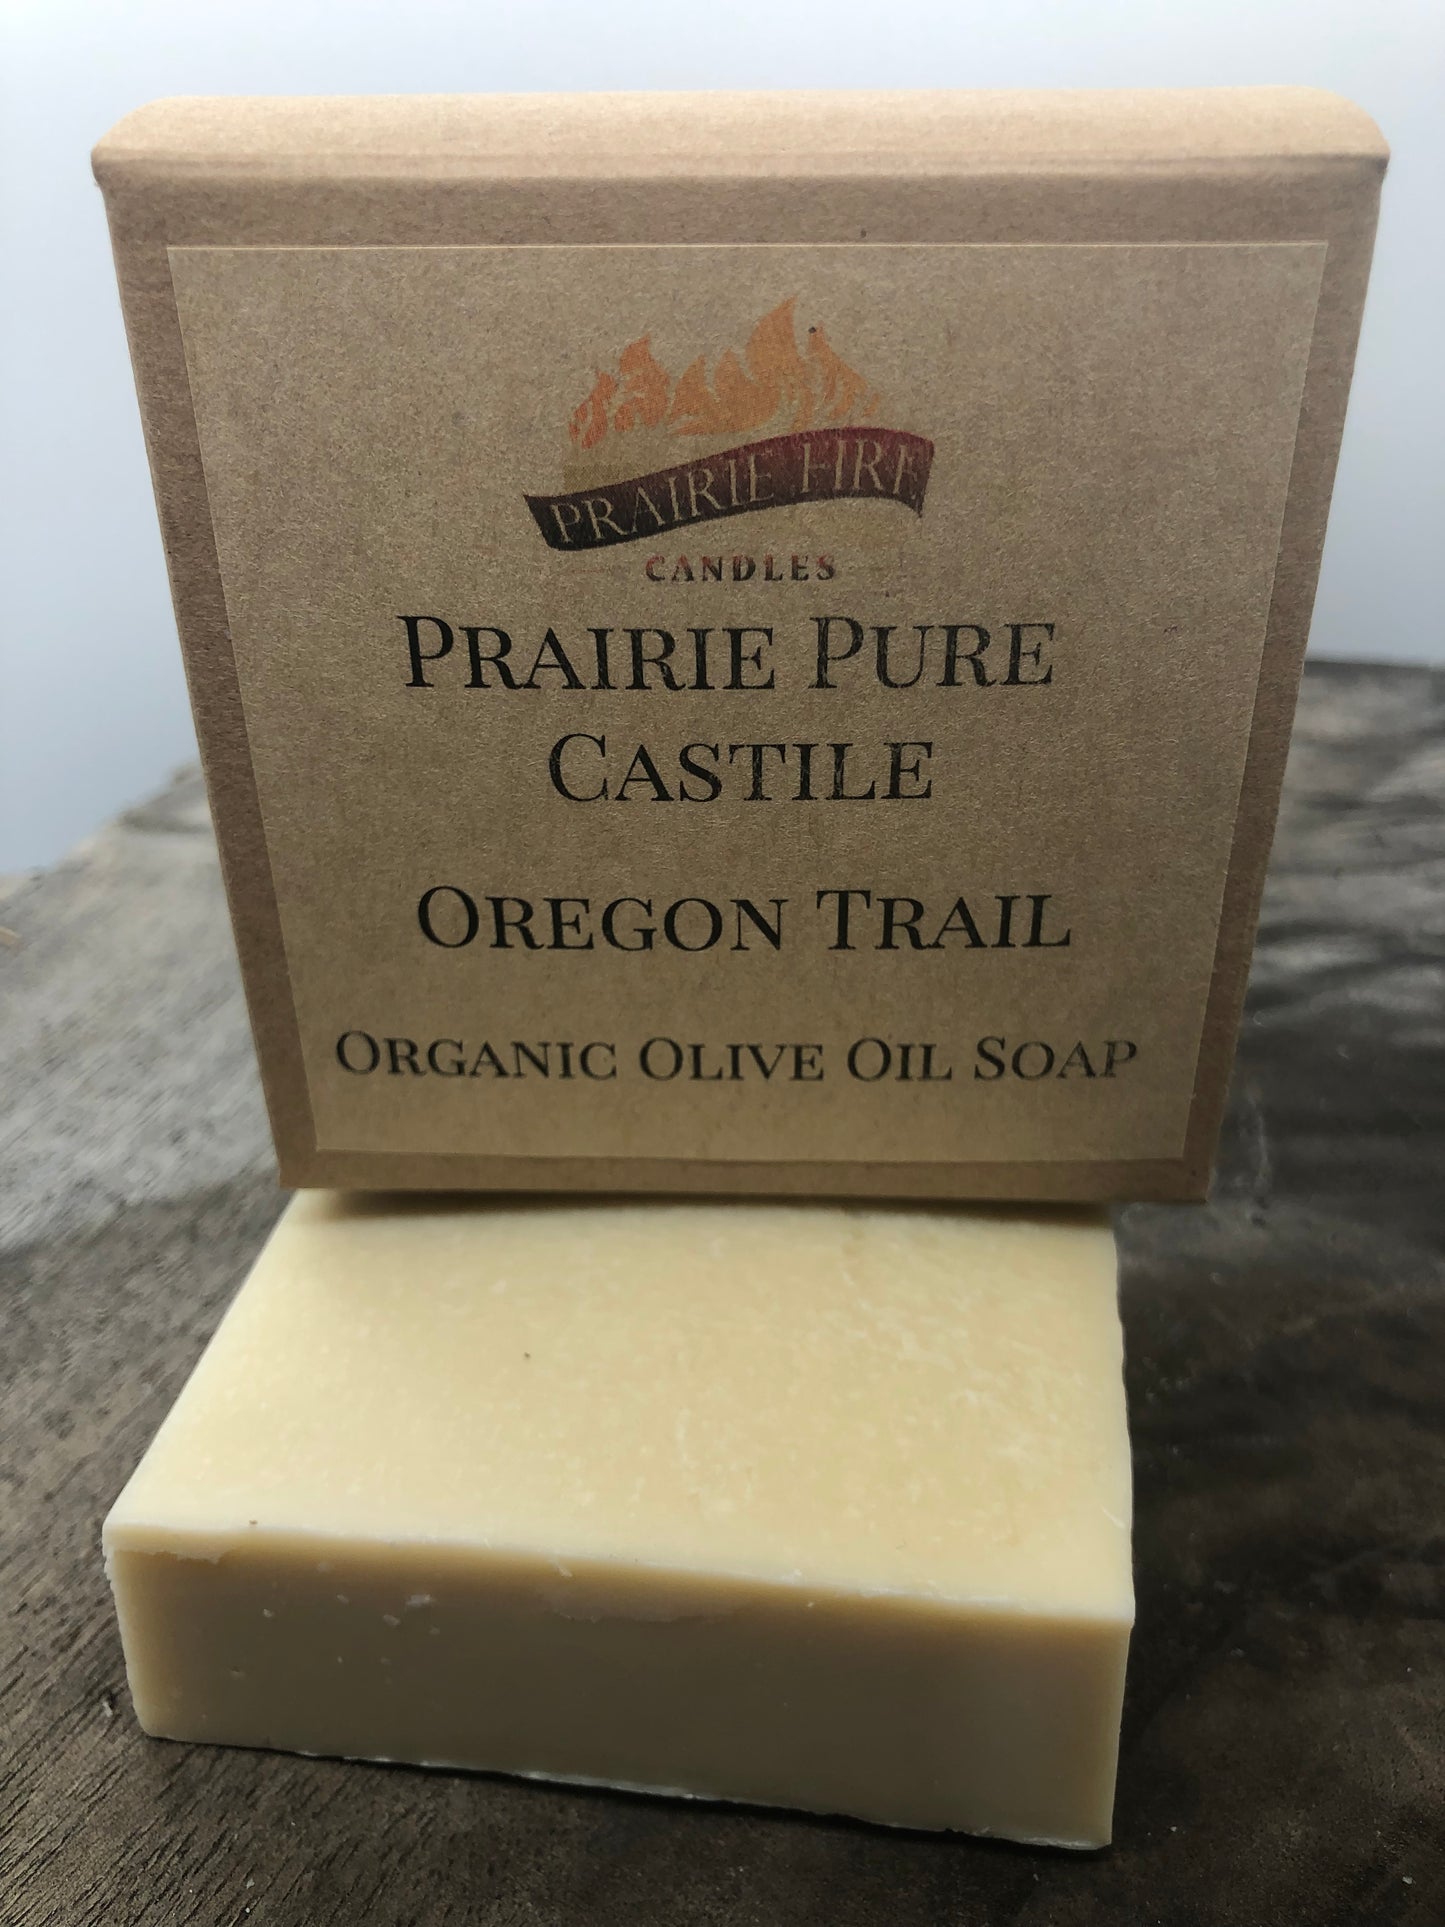 Oregon Trail Real Castile Organic Olive Oil Soap for Sensitive Skin - Dye Free - 100% Certified Organic Extra Virgin Olive Oil - Prairie Fire Candles